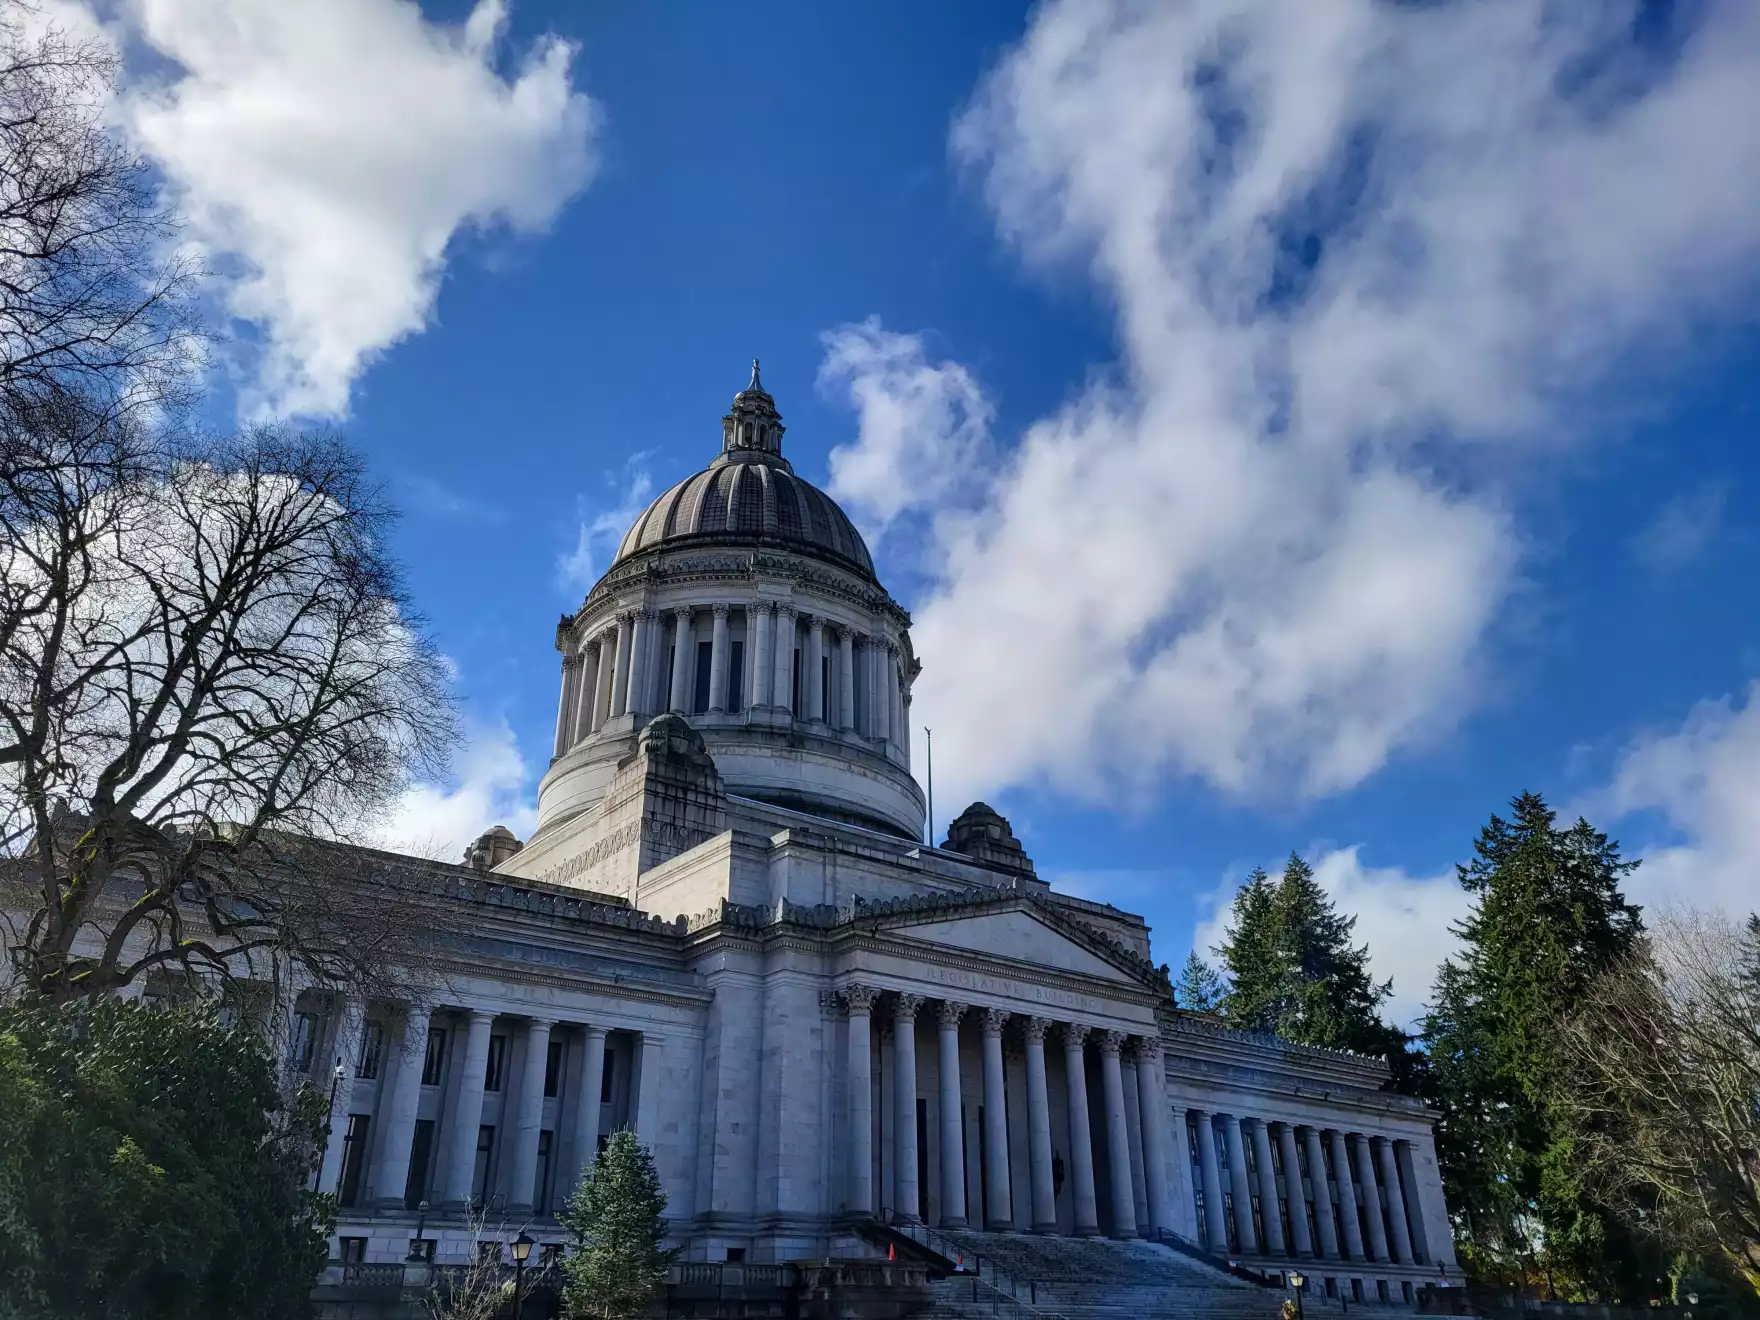 Washington's Economic and Revenue Forecast Council released the latest numbers on state tax collections Monday, as lawmakers prepare for budget negotiations to begin